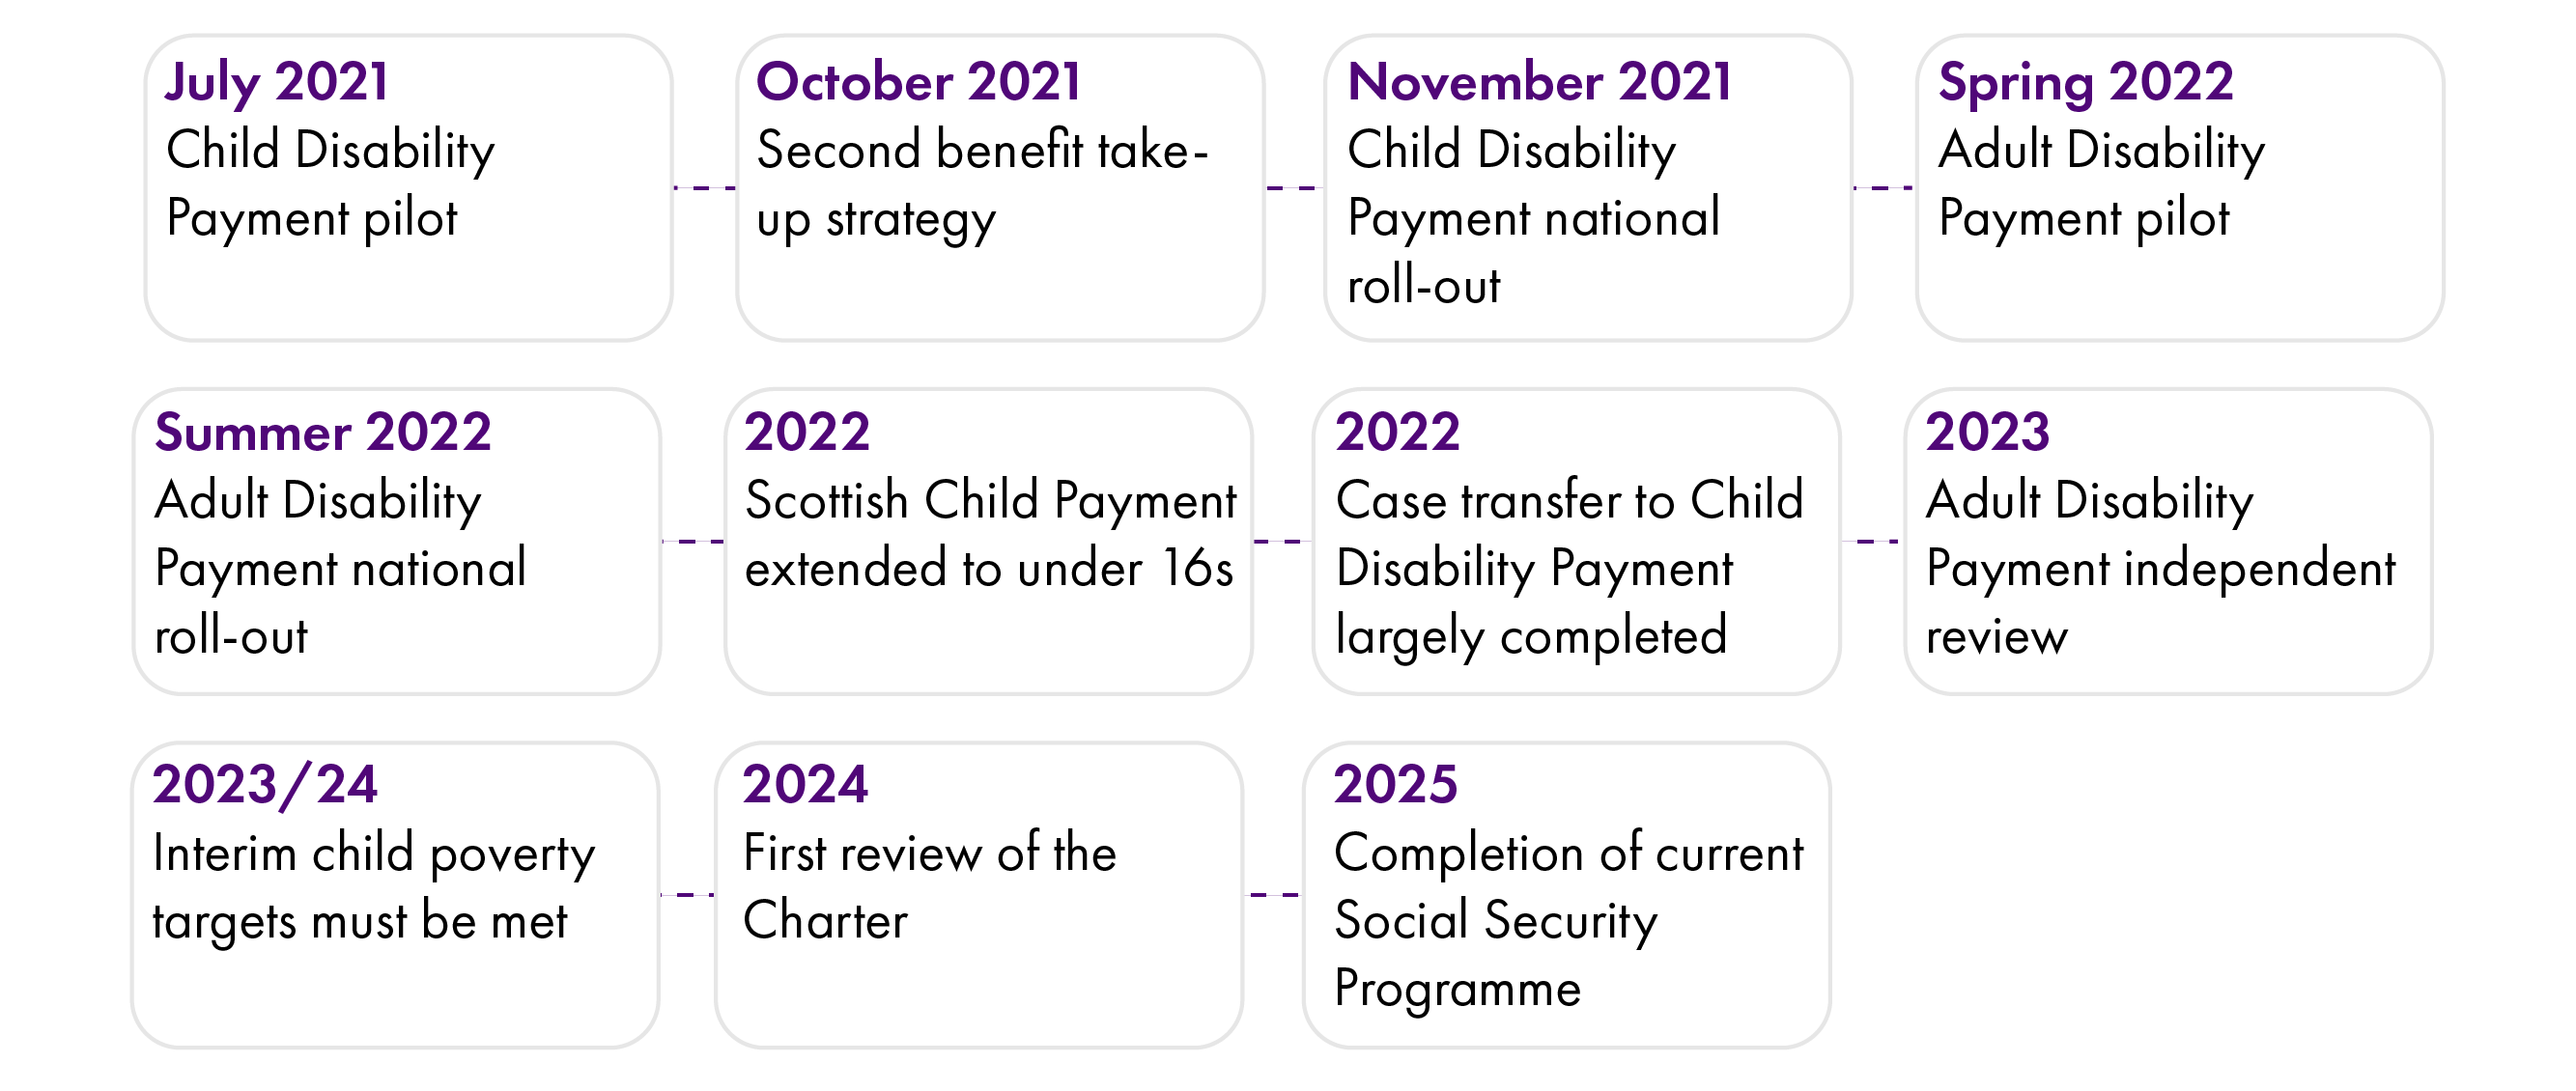 This timeline shows child disability payment starting in 2021 and adult disability payment in 2022. The Scottish child payment is extended to under 16s by the end of 2022 and interim child poverty targets must be met by 2023-24. An independent review of adult disability payment is expected in 2023 and the charter must be reviewed in 2024.